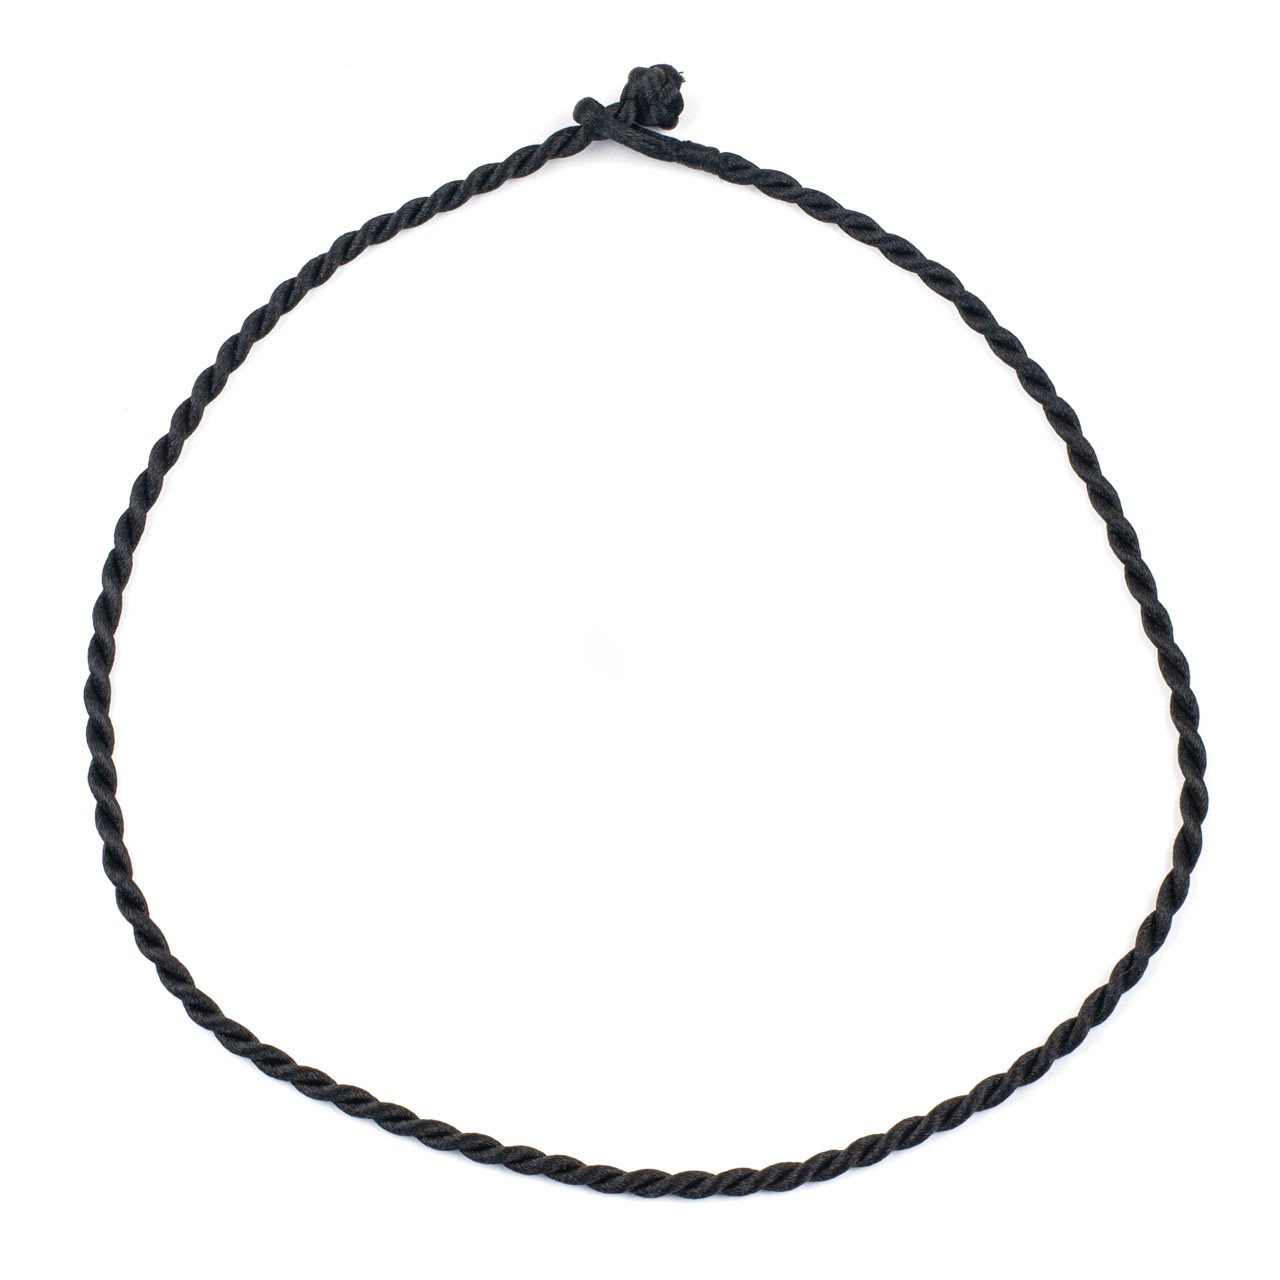 Braided Satin Nylon Cord Necklace - Black 5mm Cord 18 with Knot